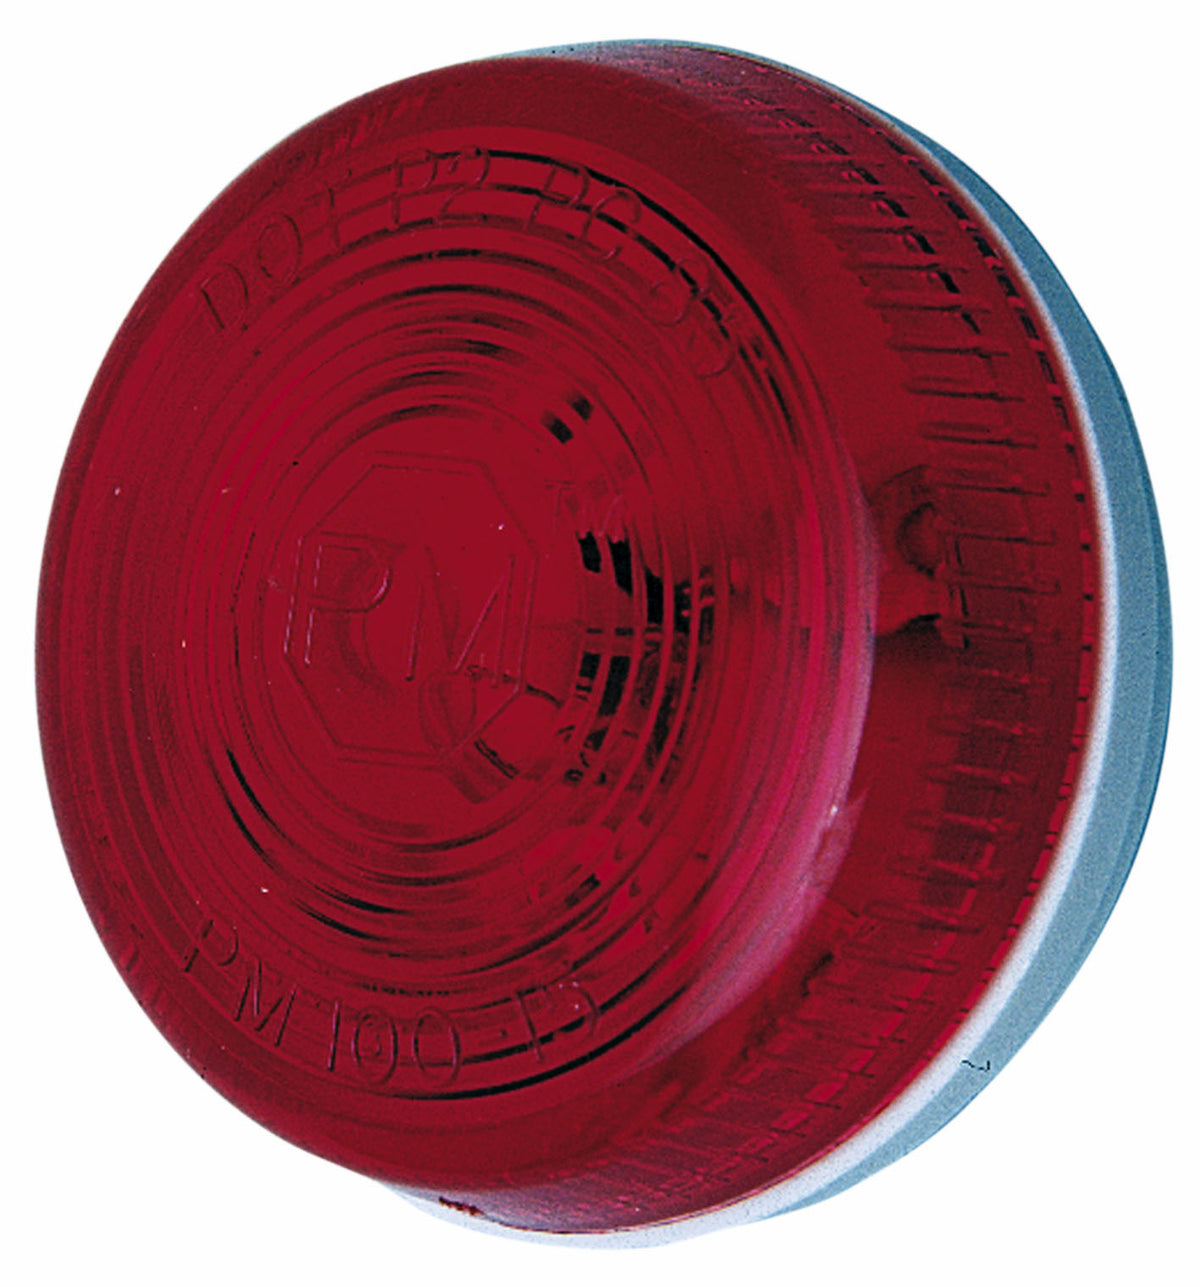 Peterson 80943 Surface Mount Compact Vibar Lamp, 2-1/2", Red